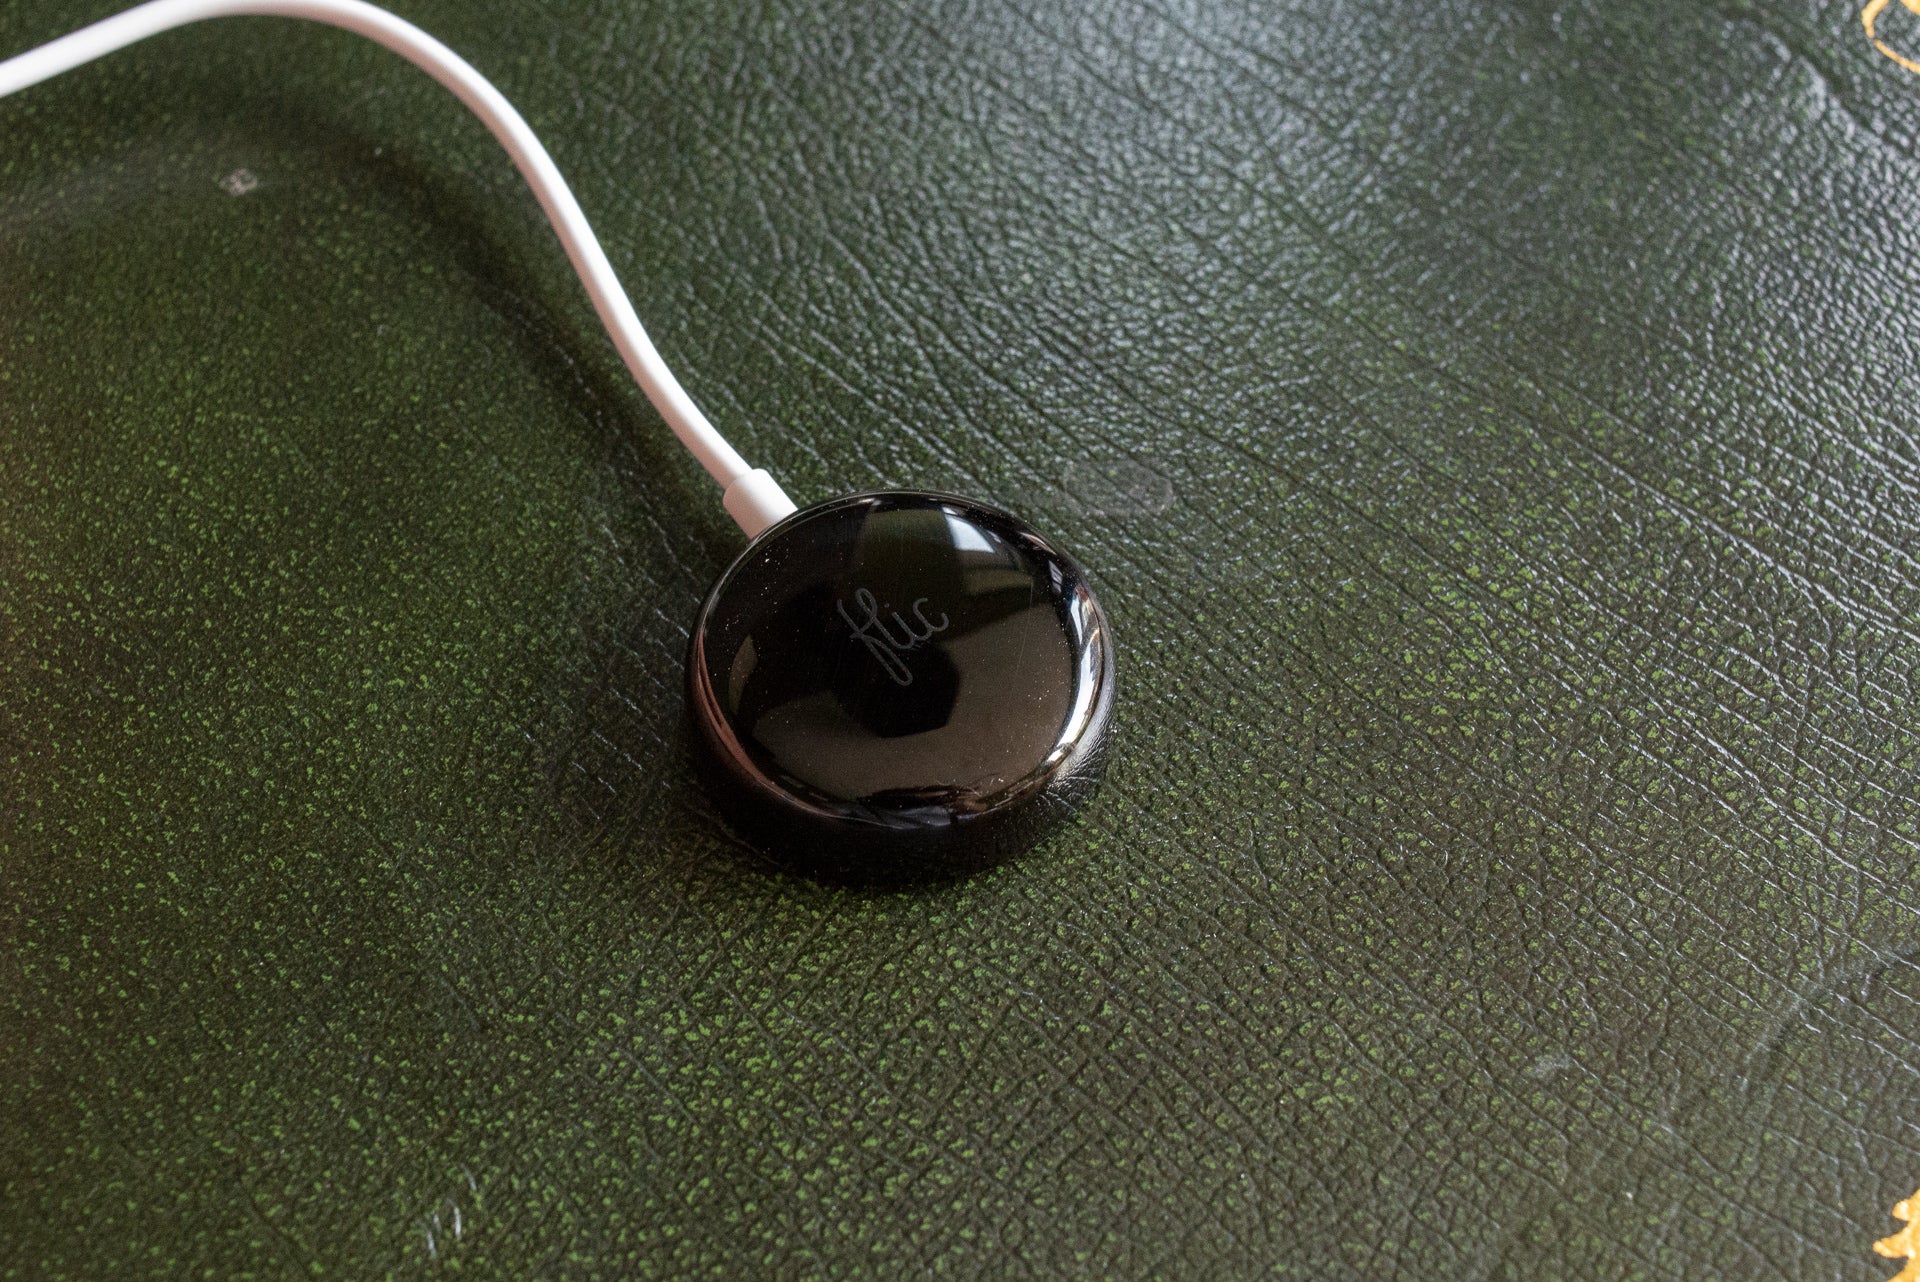 Flic smart button on textured green surface with white cable.